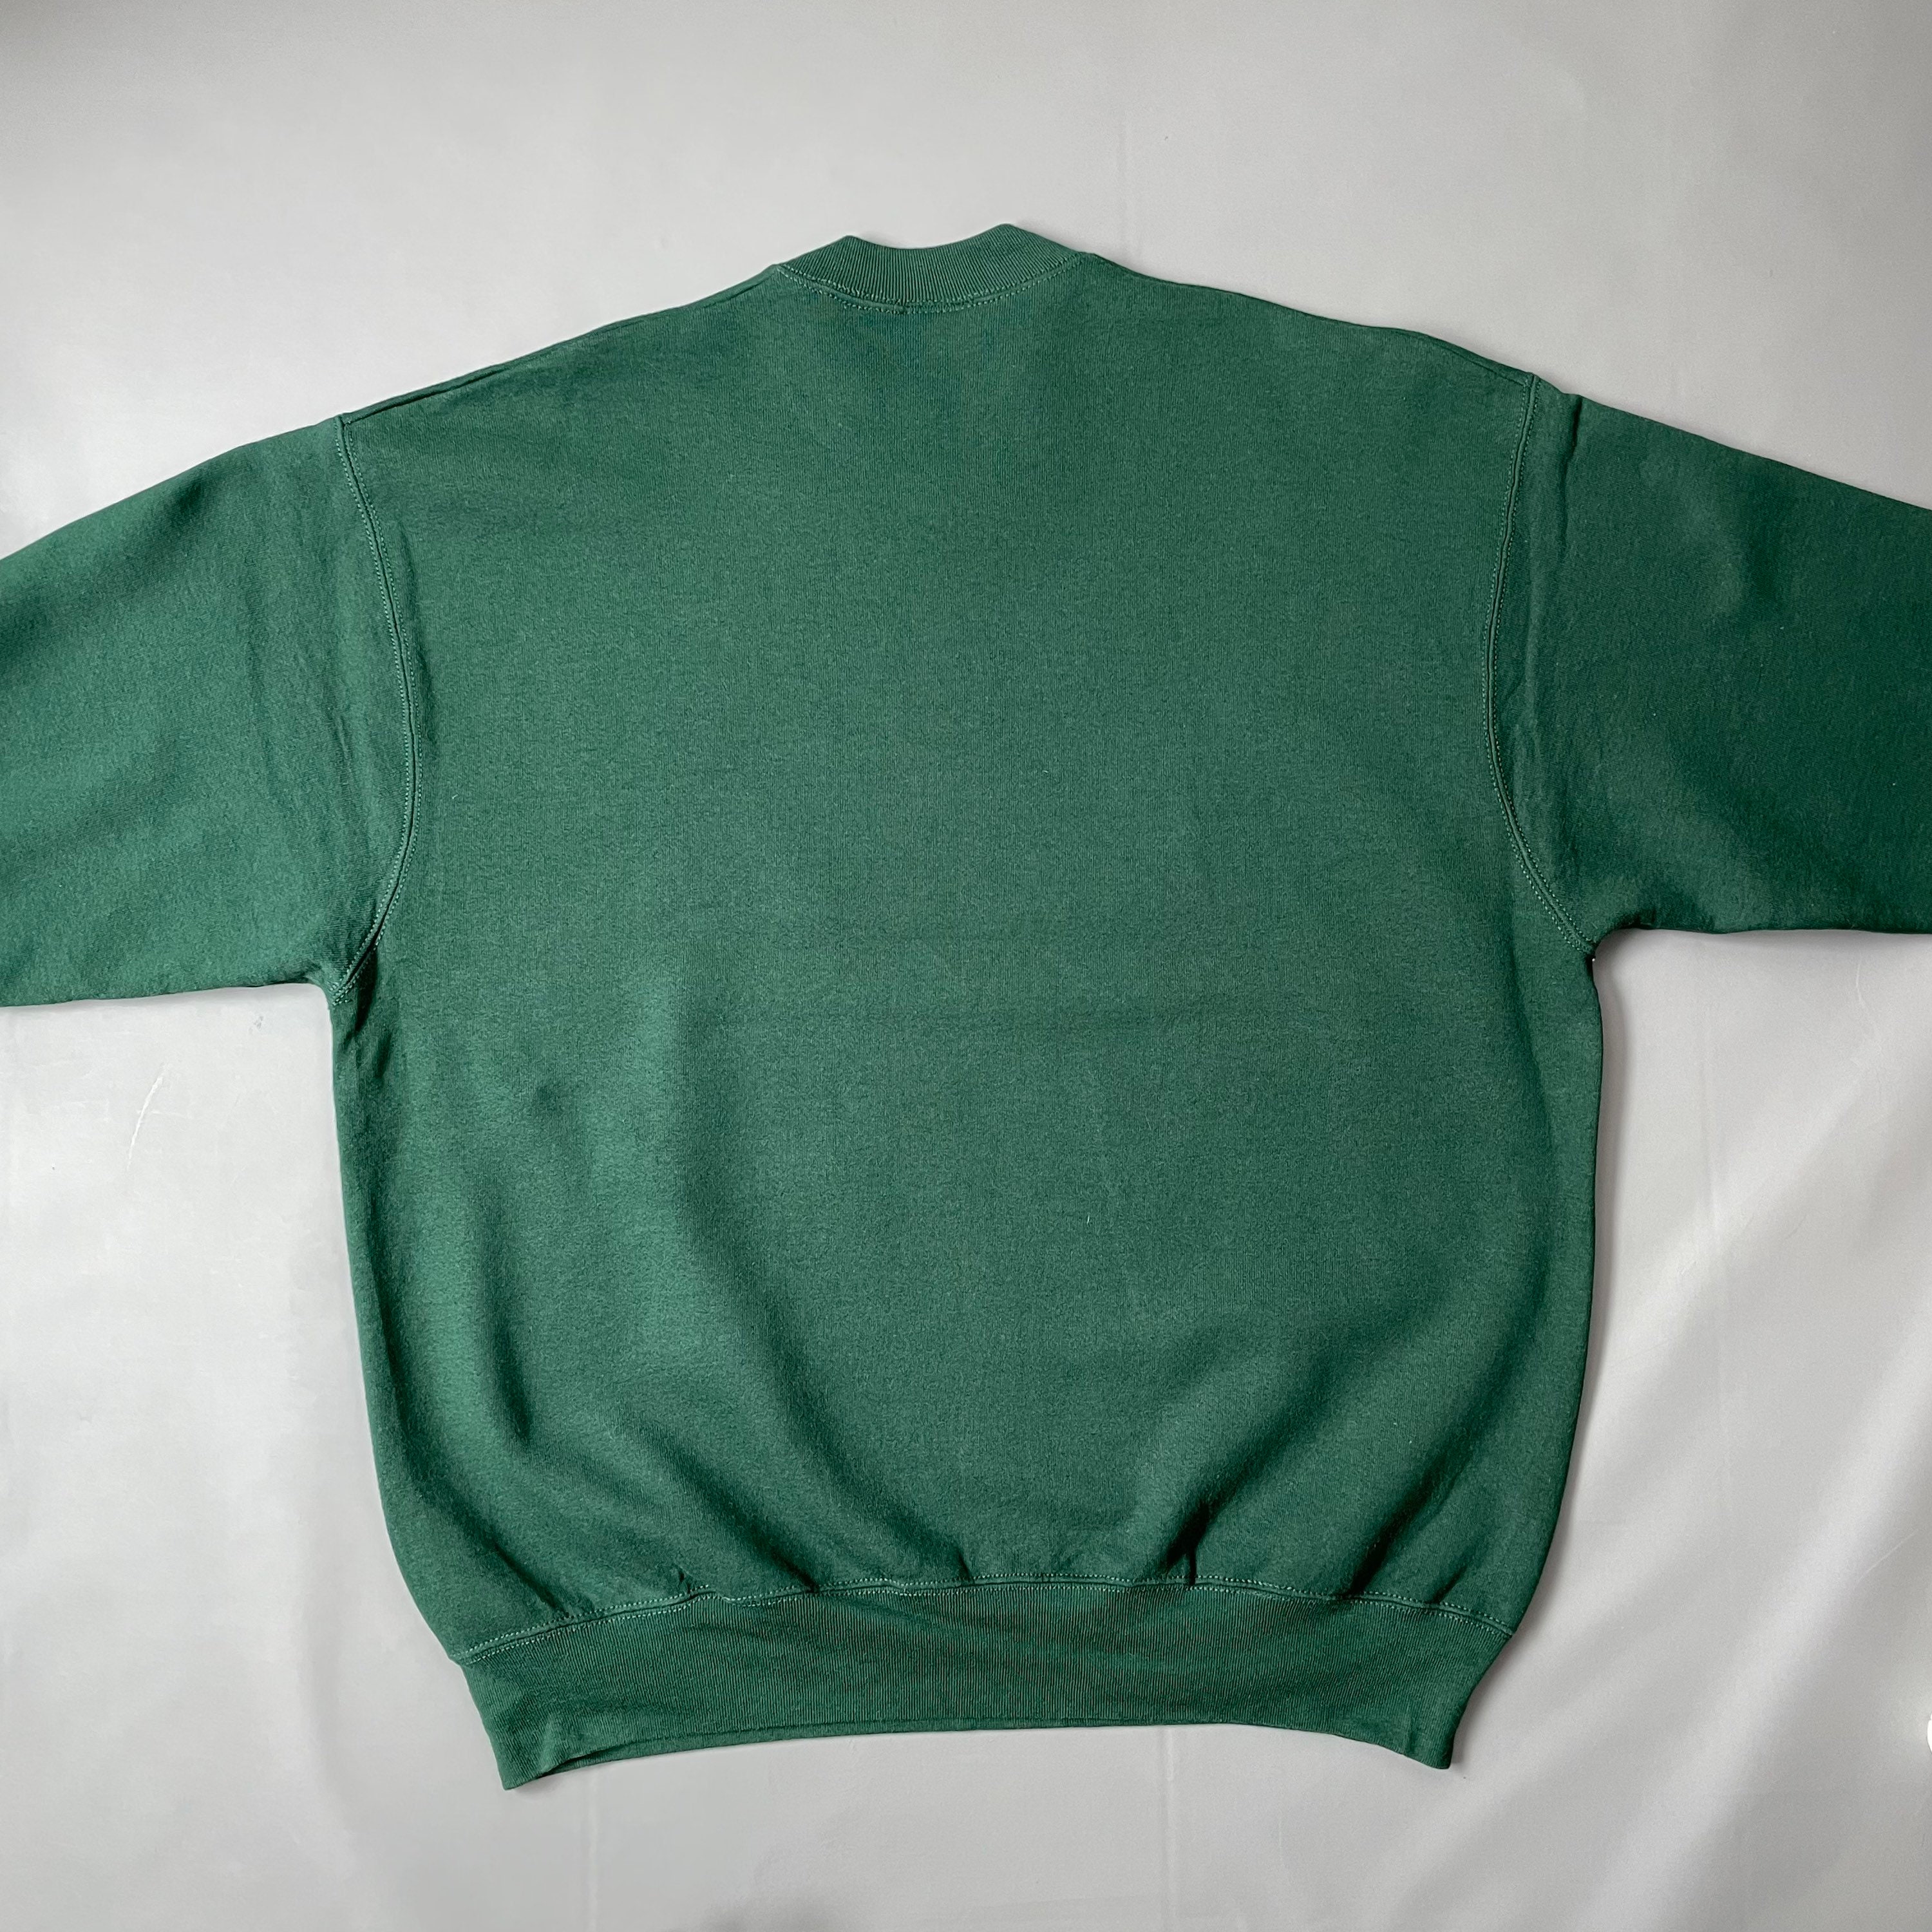 Vintage Green Bay Packers NFL Football Embroidered Crewneck - Etsy